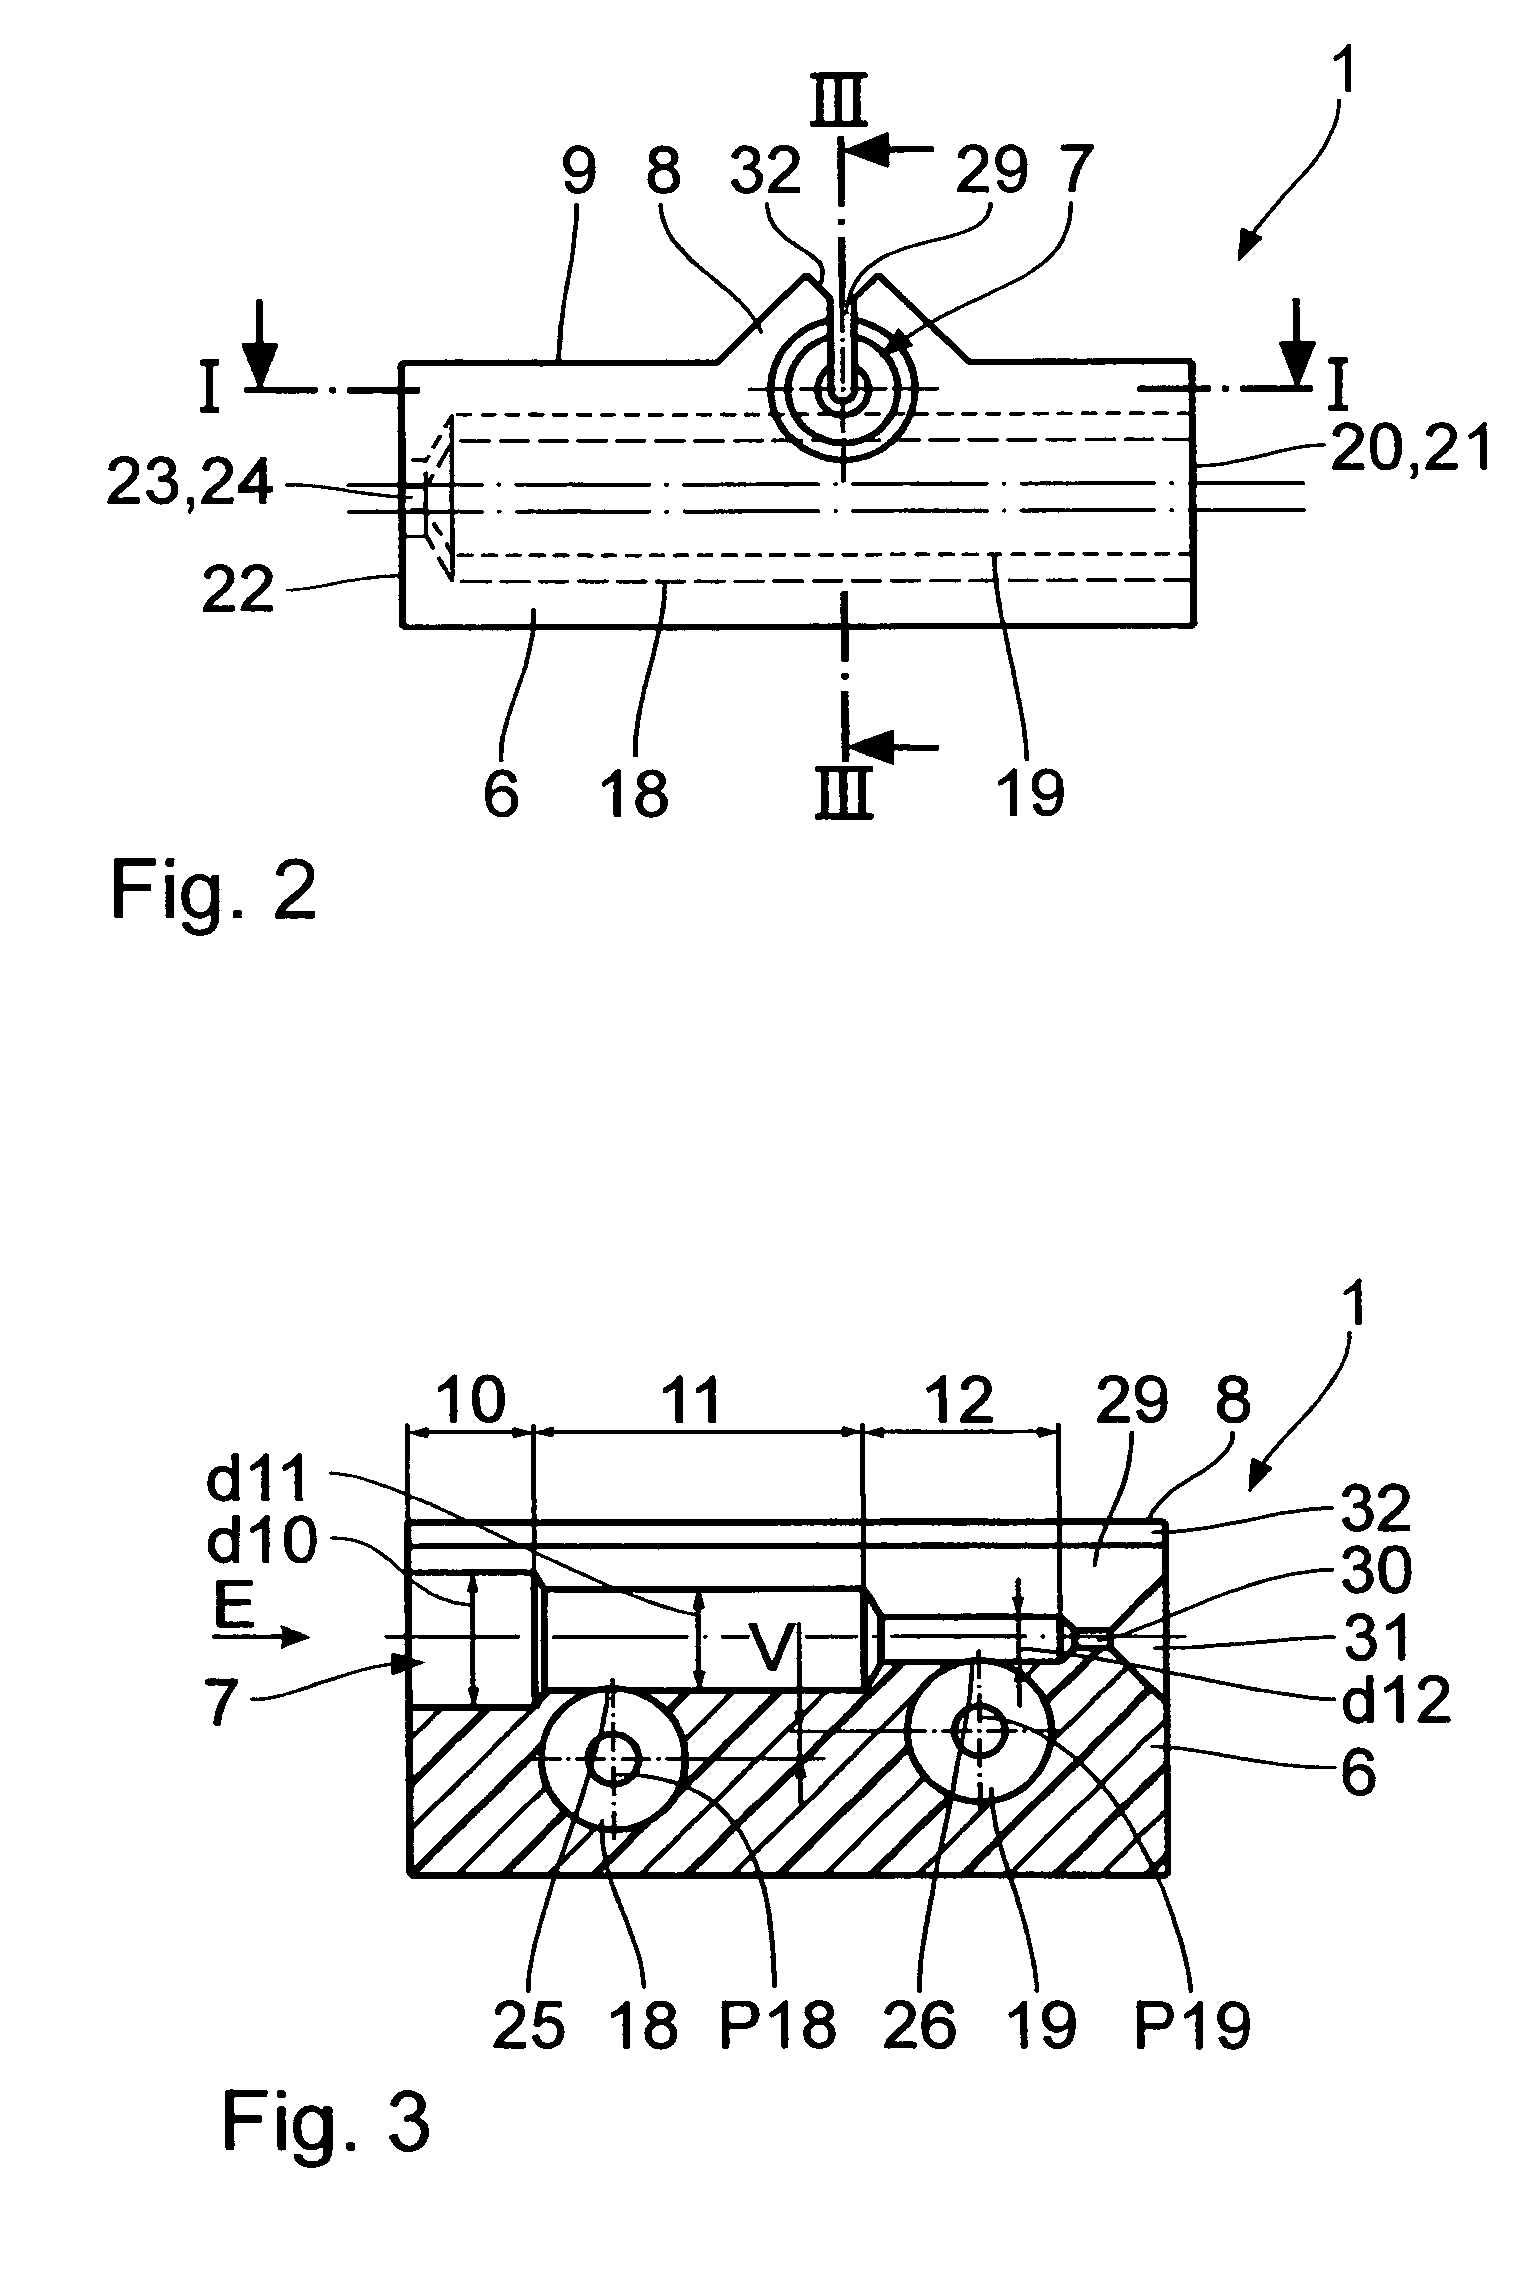 Contact connection adapter for producing an intermittent electrical contact between two plugs